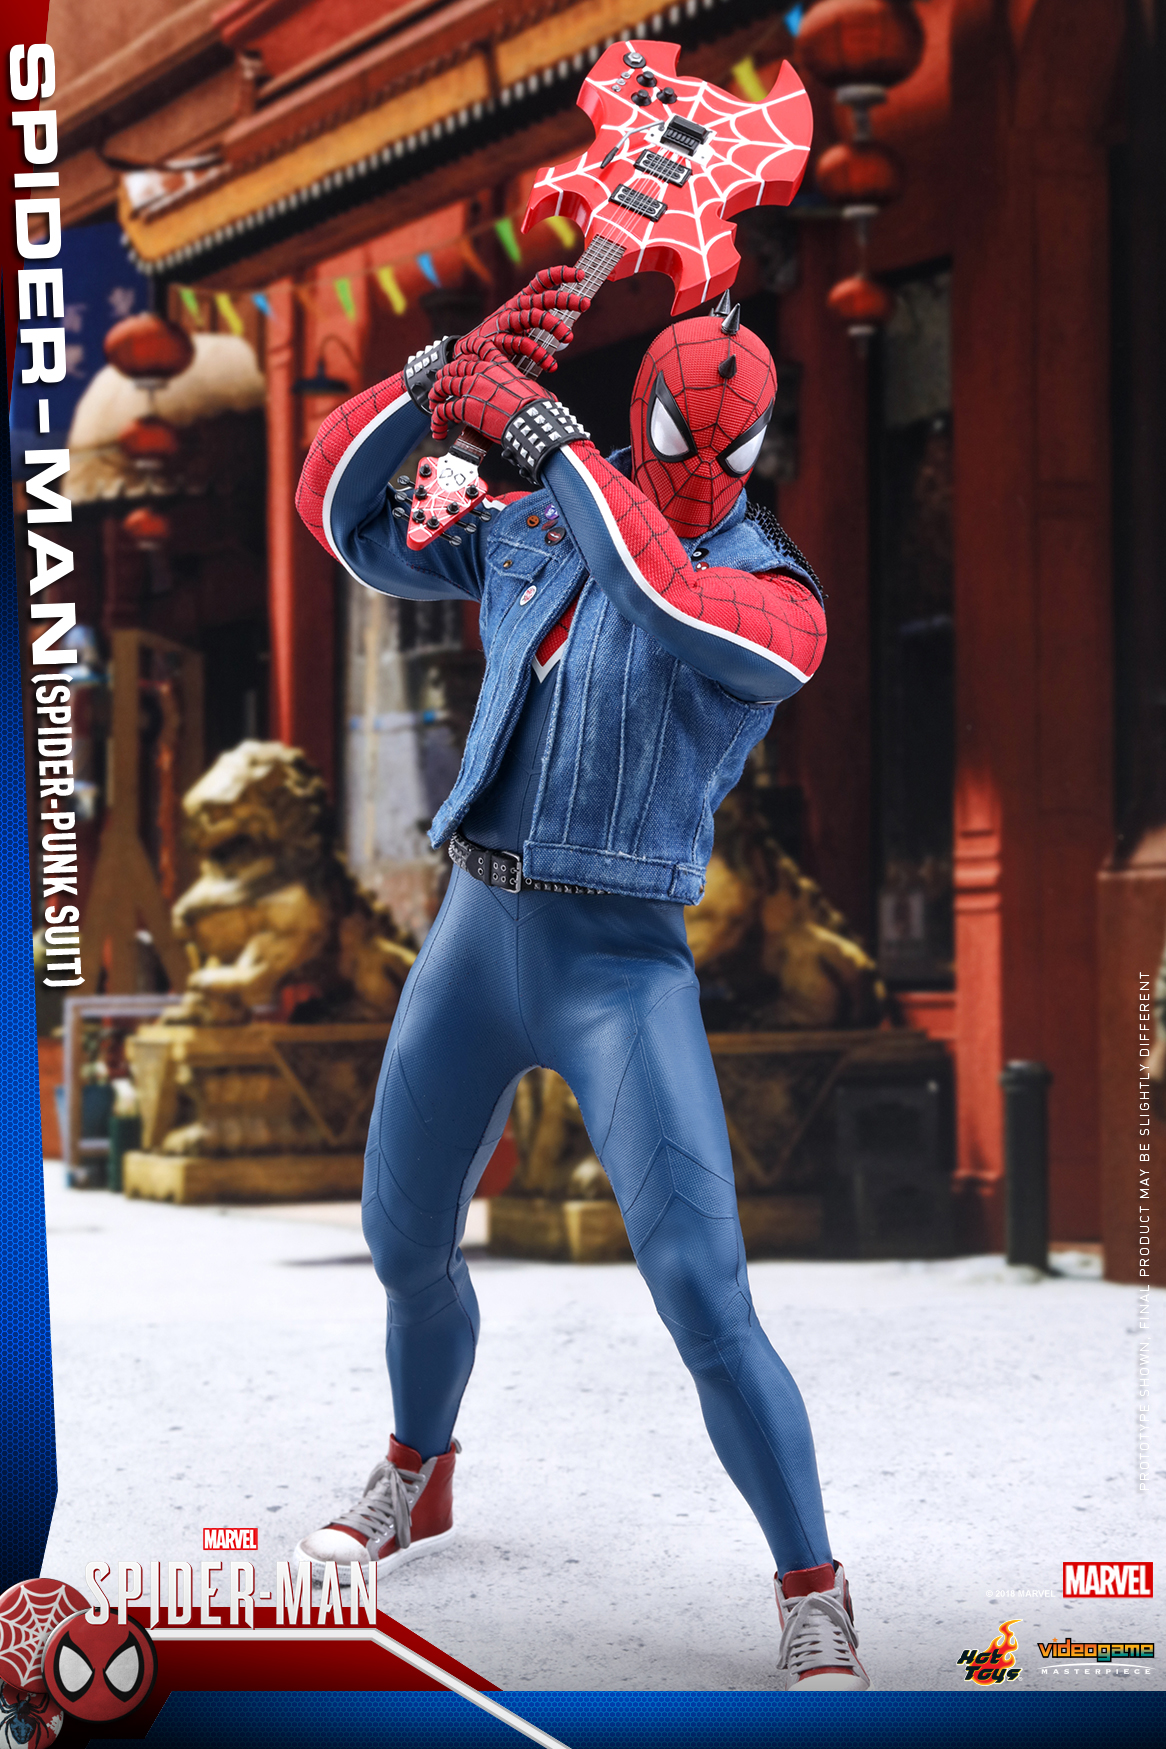 READY HOT TOYS SPIDER-MAN SPIDER-PUNK SUIT VGM32 1/6 NEW MISB VIDEO GAME PS4 